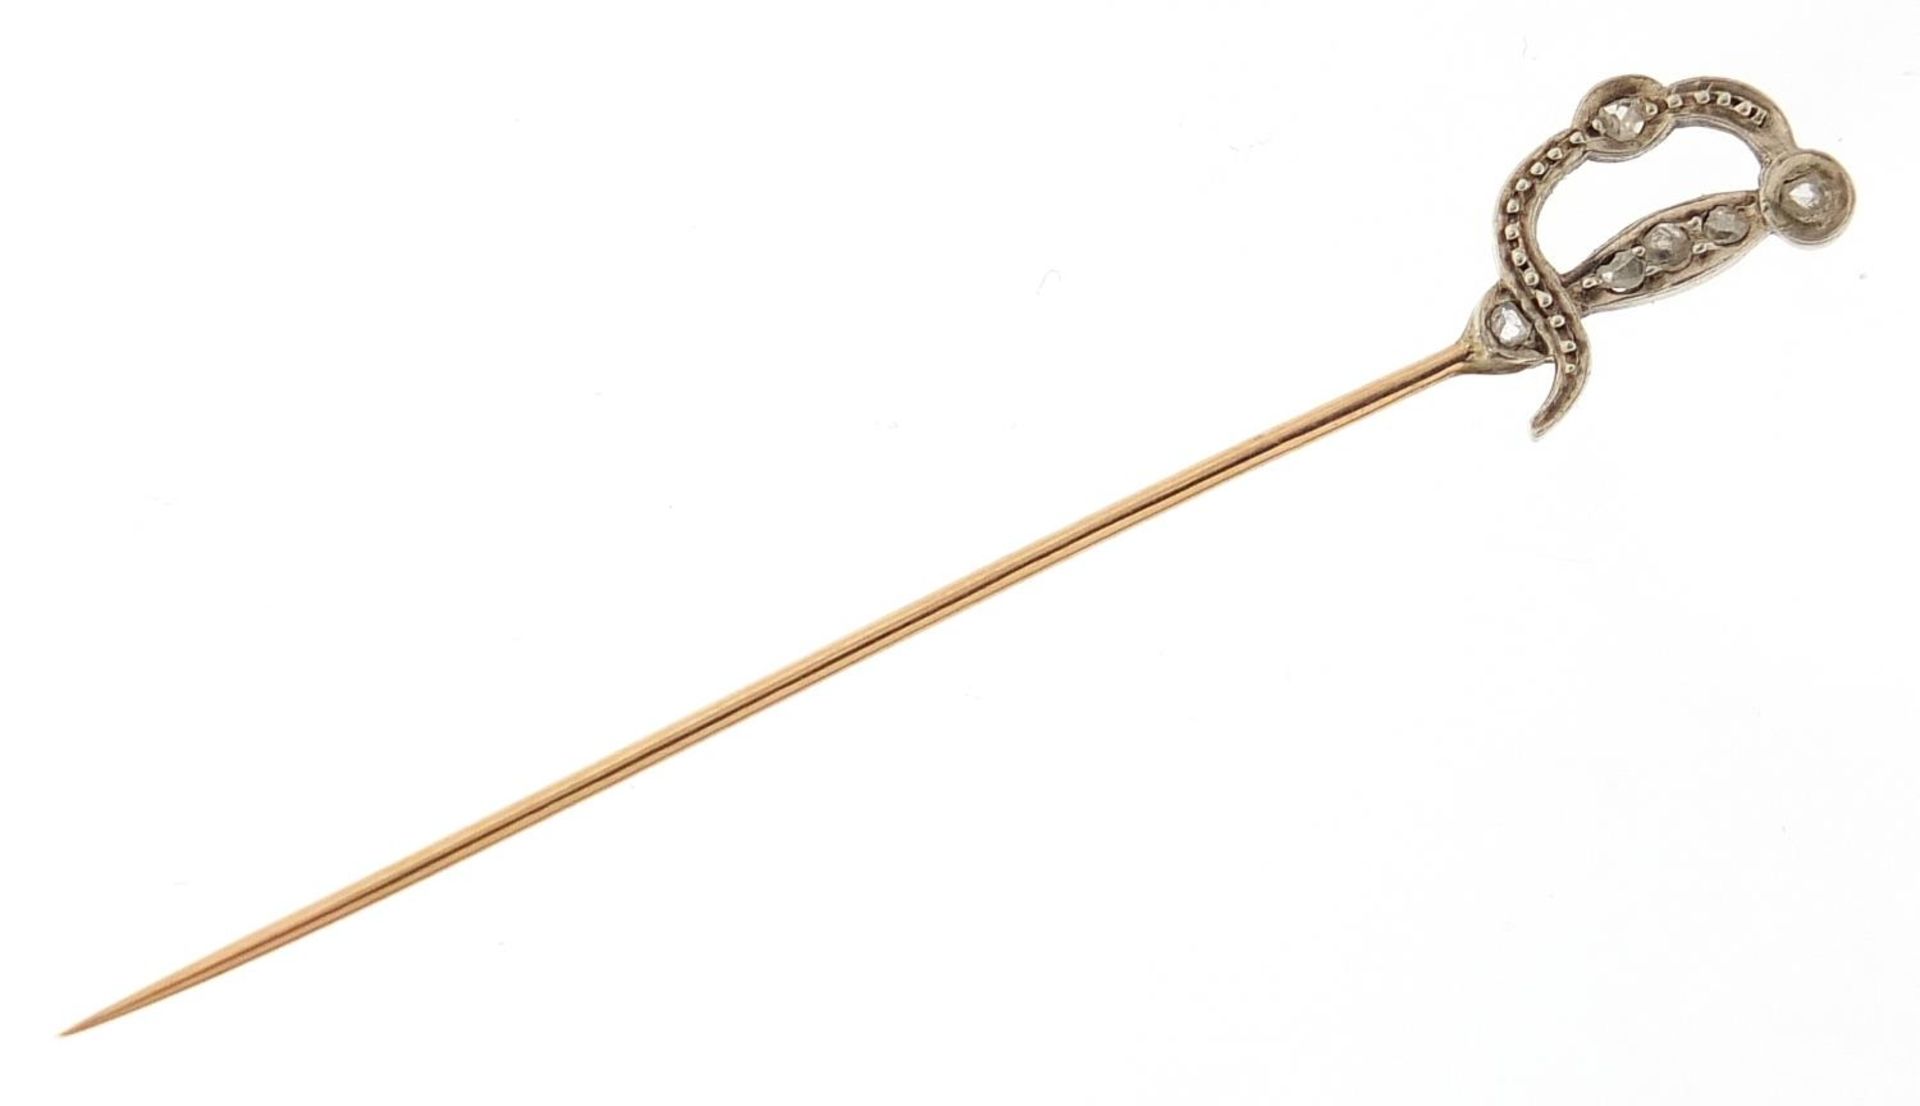 Antique unmarked gold diamond stick pin in the form of a sword, 6.5cm in length, 1.3g